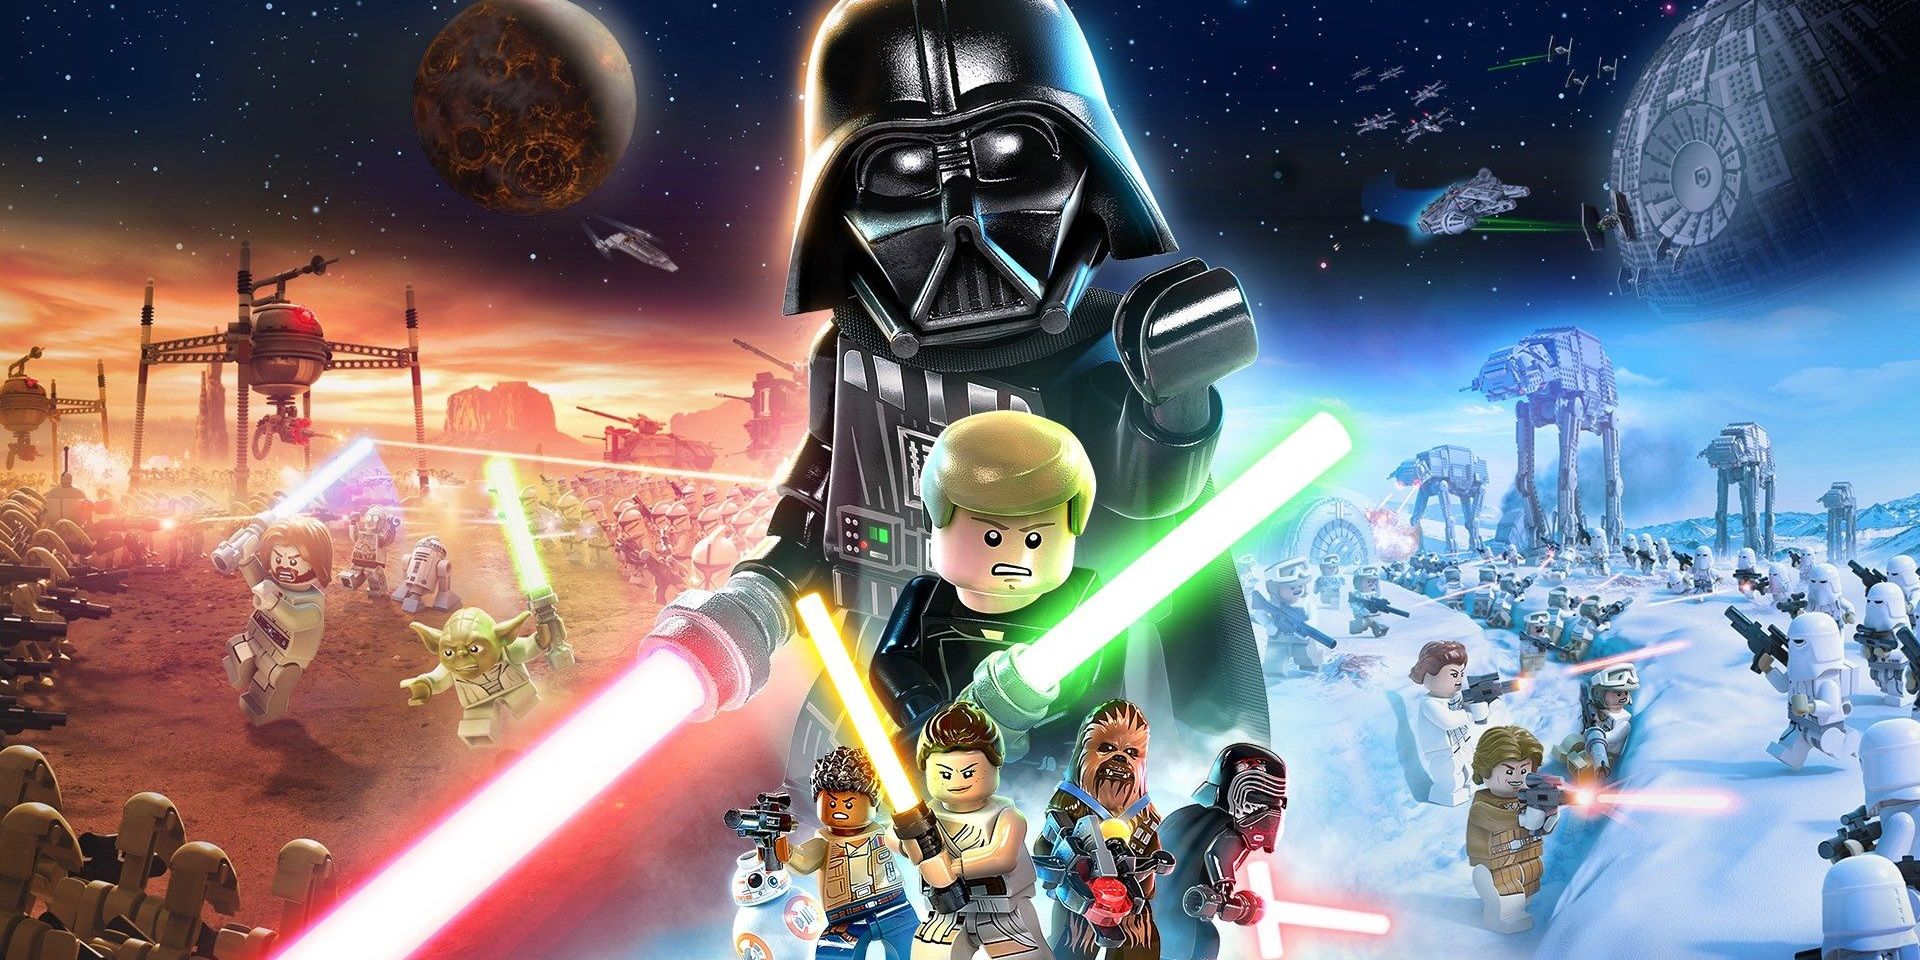 Various Lego Star Wars character (including Darth Vader) with lightsabers